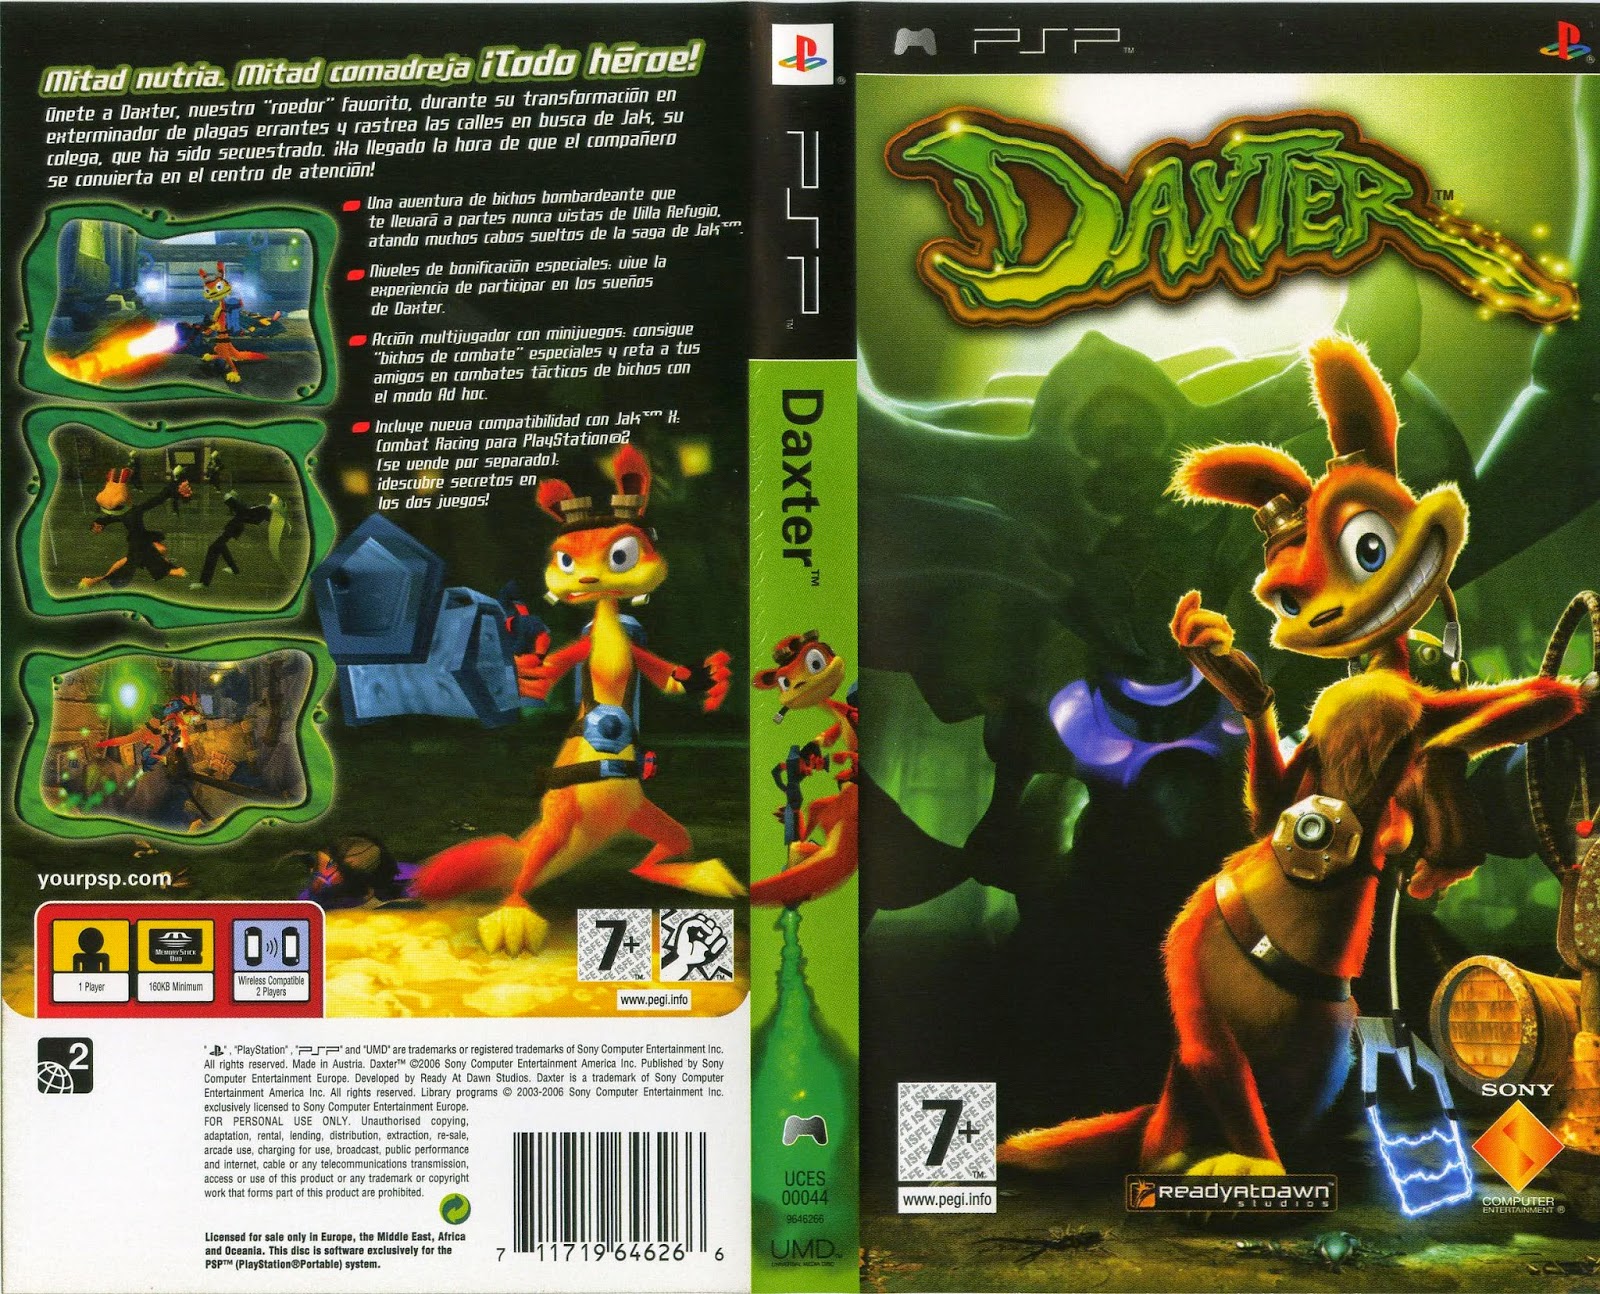 Download Daxter Android [PSP + PPSSPP] Apk ISO Game Free ...